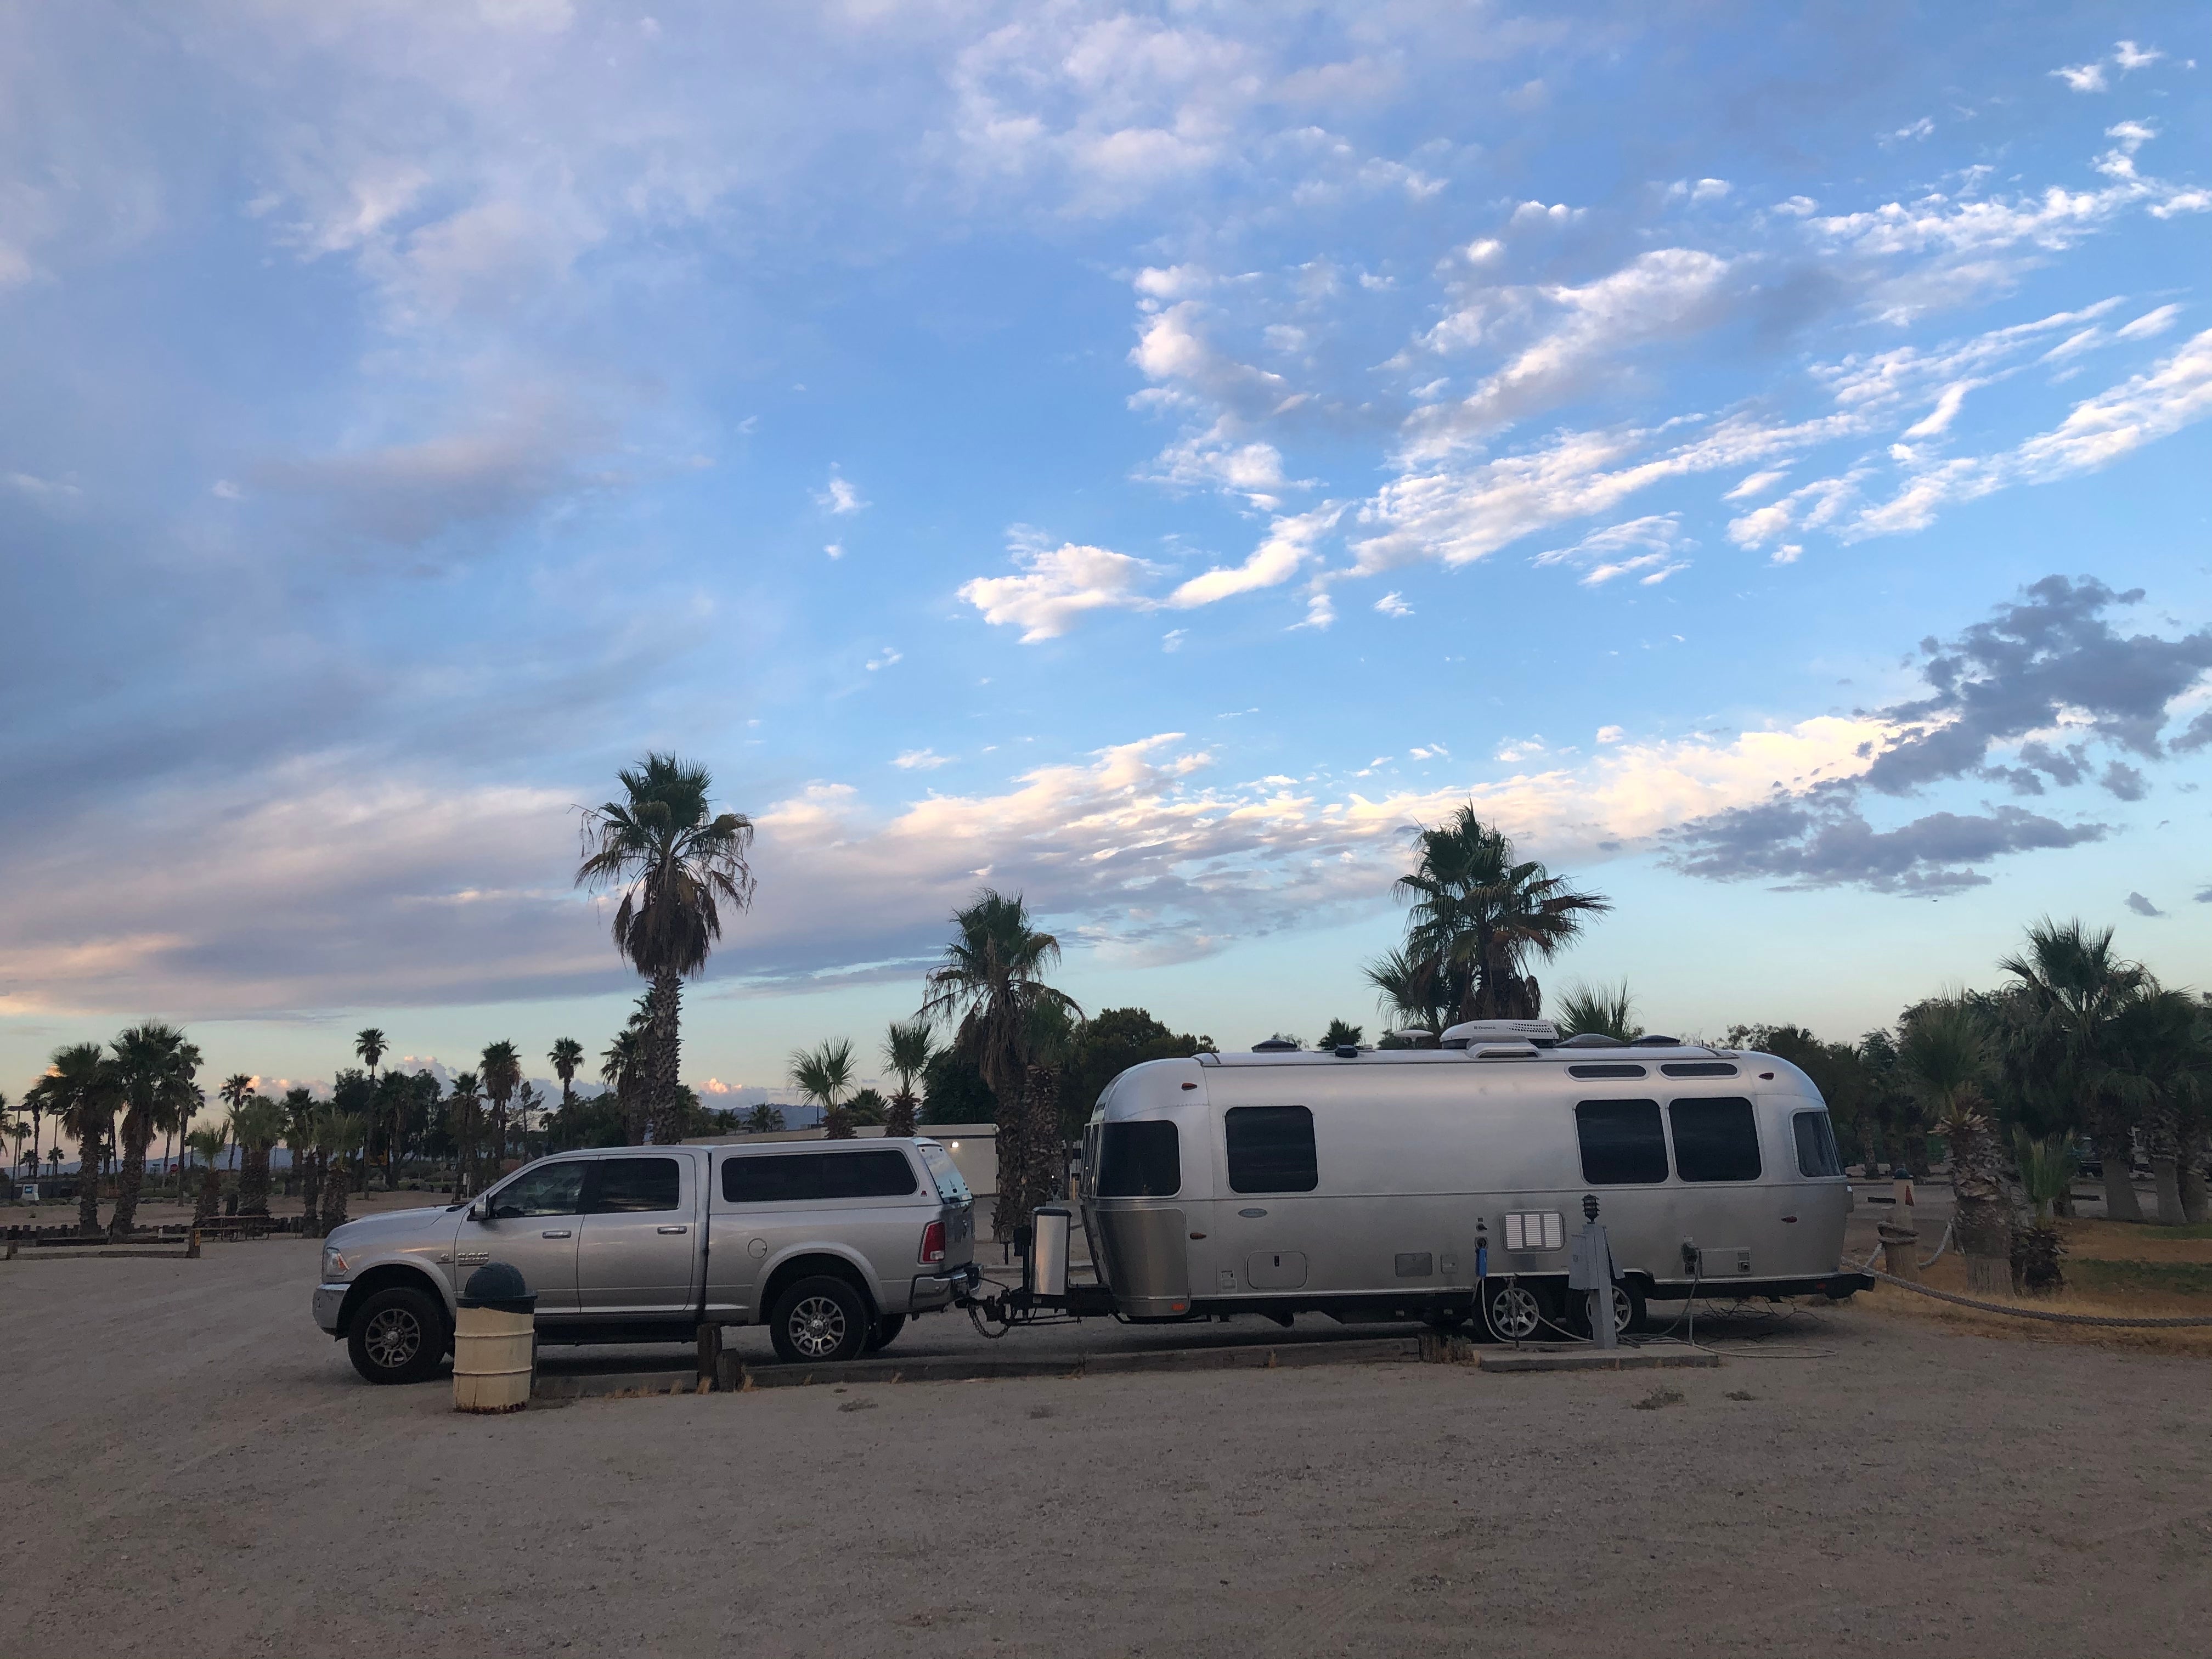 Camper submitted image from Laughlin Avi KOA / Journey - 1